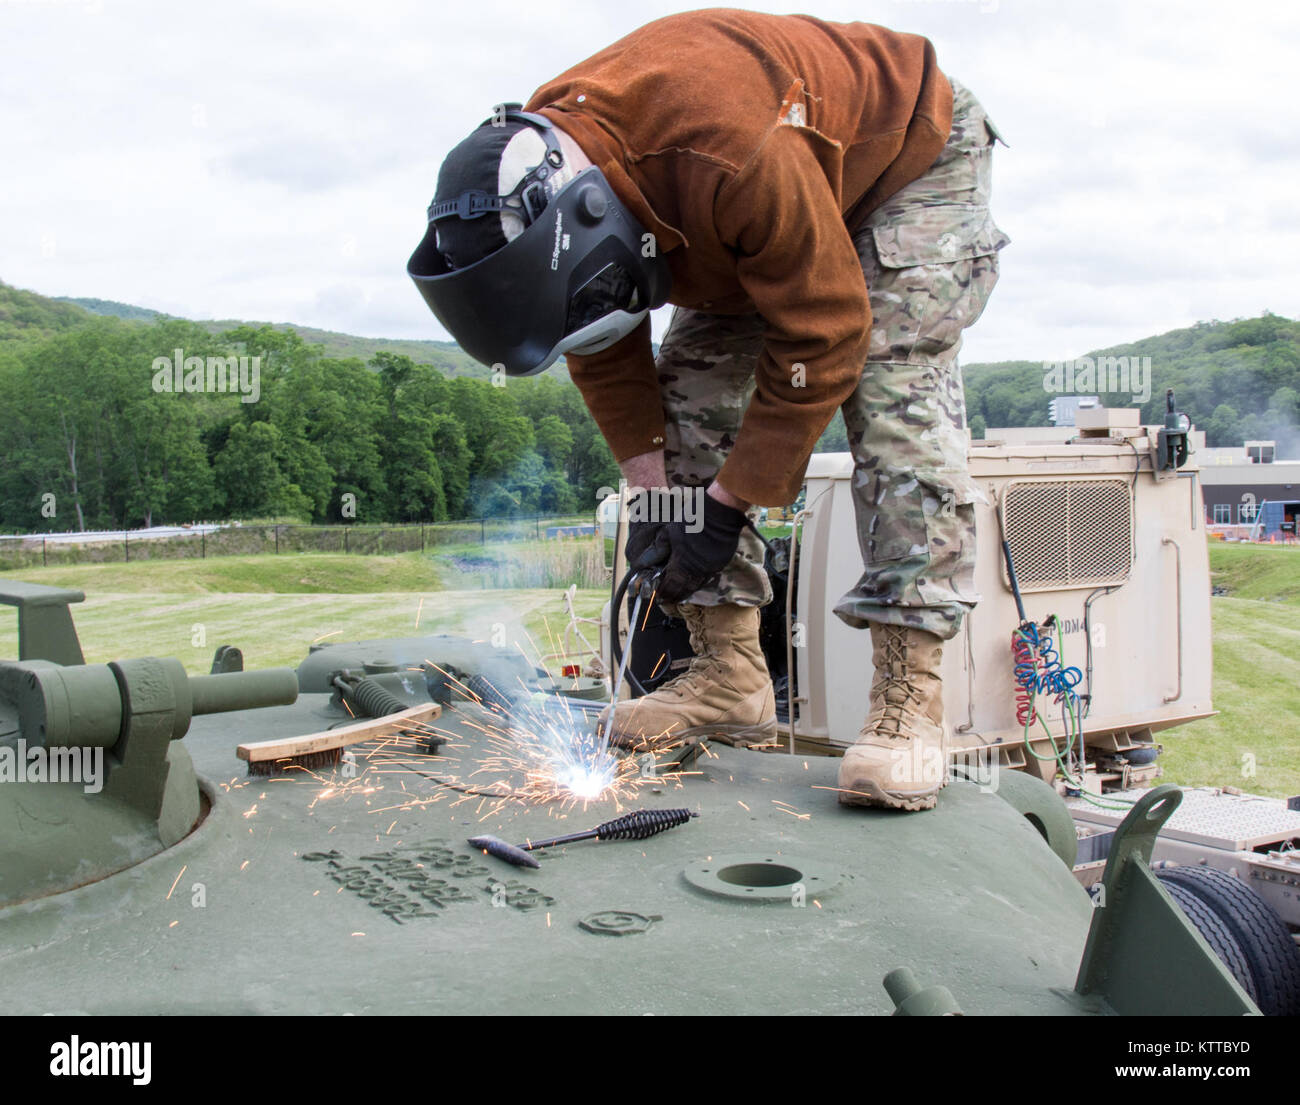 U.S. Army Staff Sgt. Cory Peck, a welder for the New York Maneuver Area Training Equipment Site at Ft. Drum and attached to the 1427th Transportation Company, New York Army National Guard, uses a striker to stick weld the hatch on a recently restored M48 tank on display at Camp Smith Training Site, Cortlandt Manor, N.Y., June 16, 2017. (U.S. Army National Guard photo by Staff Sgt. Michael Davis) Stock Photo